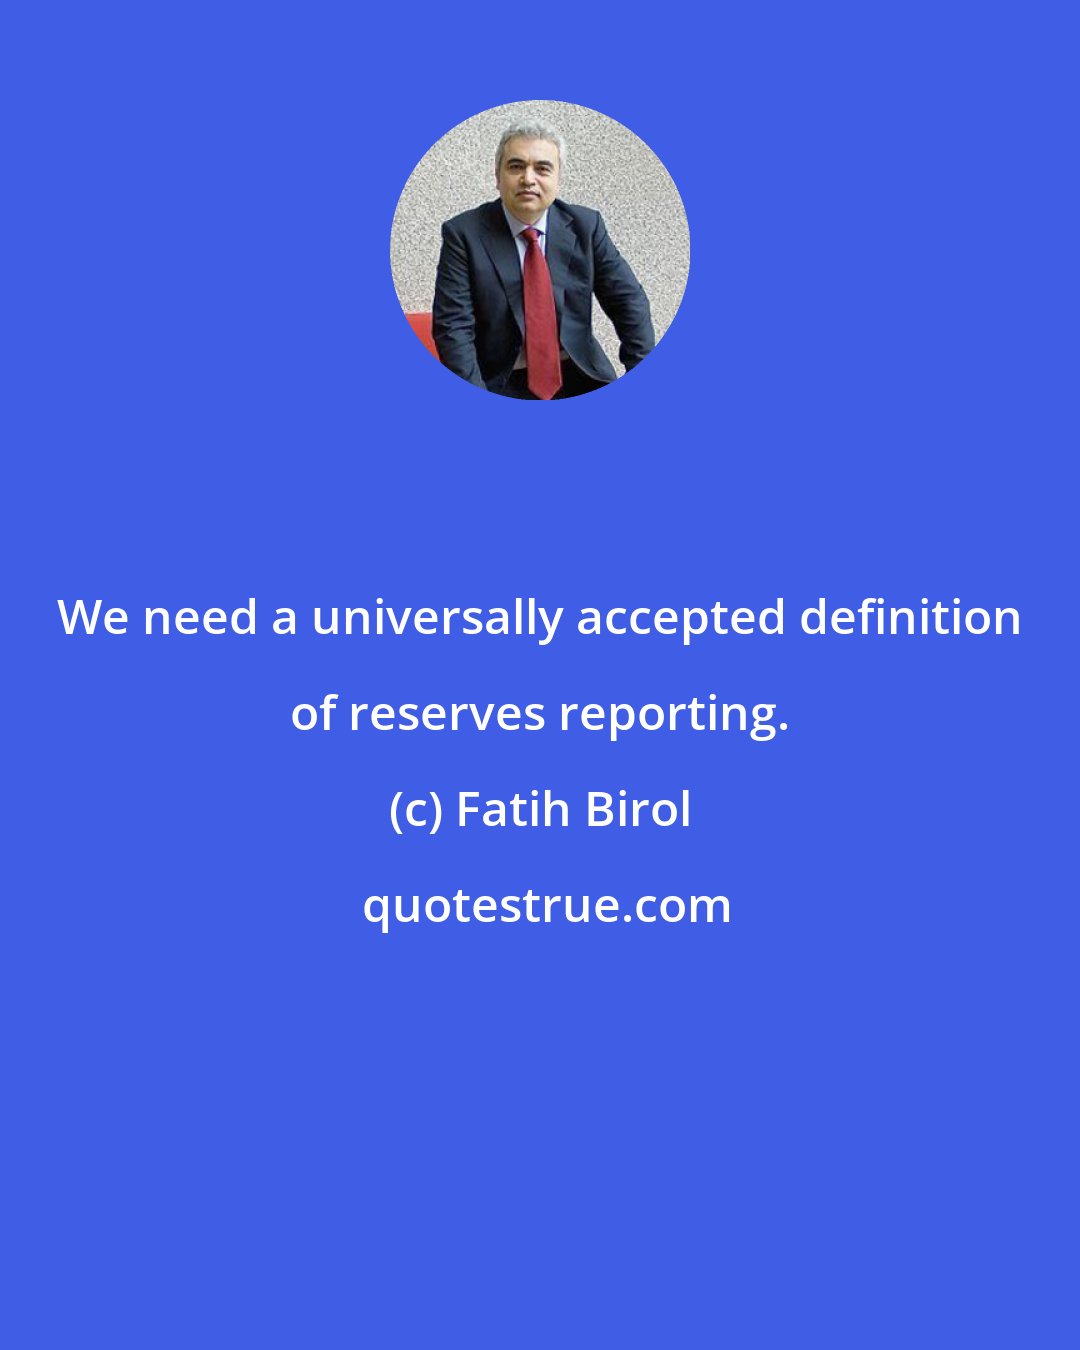 Fatih Birol: We need a universally accepted definition of reserves reporting.